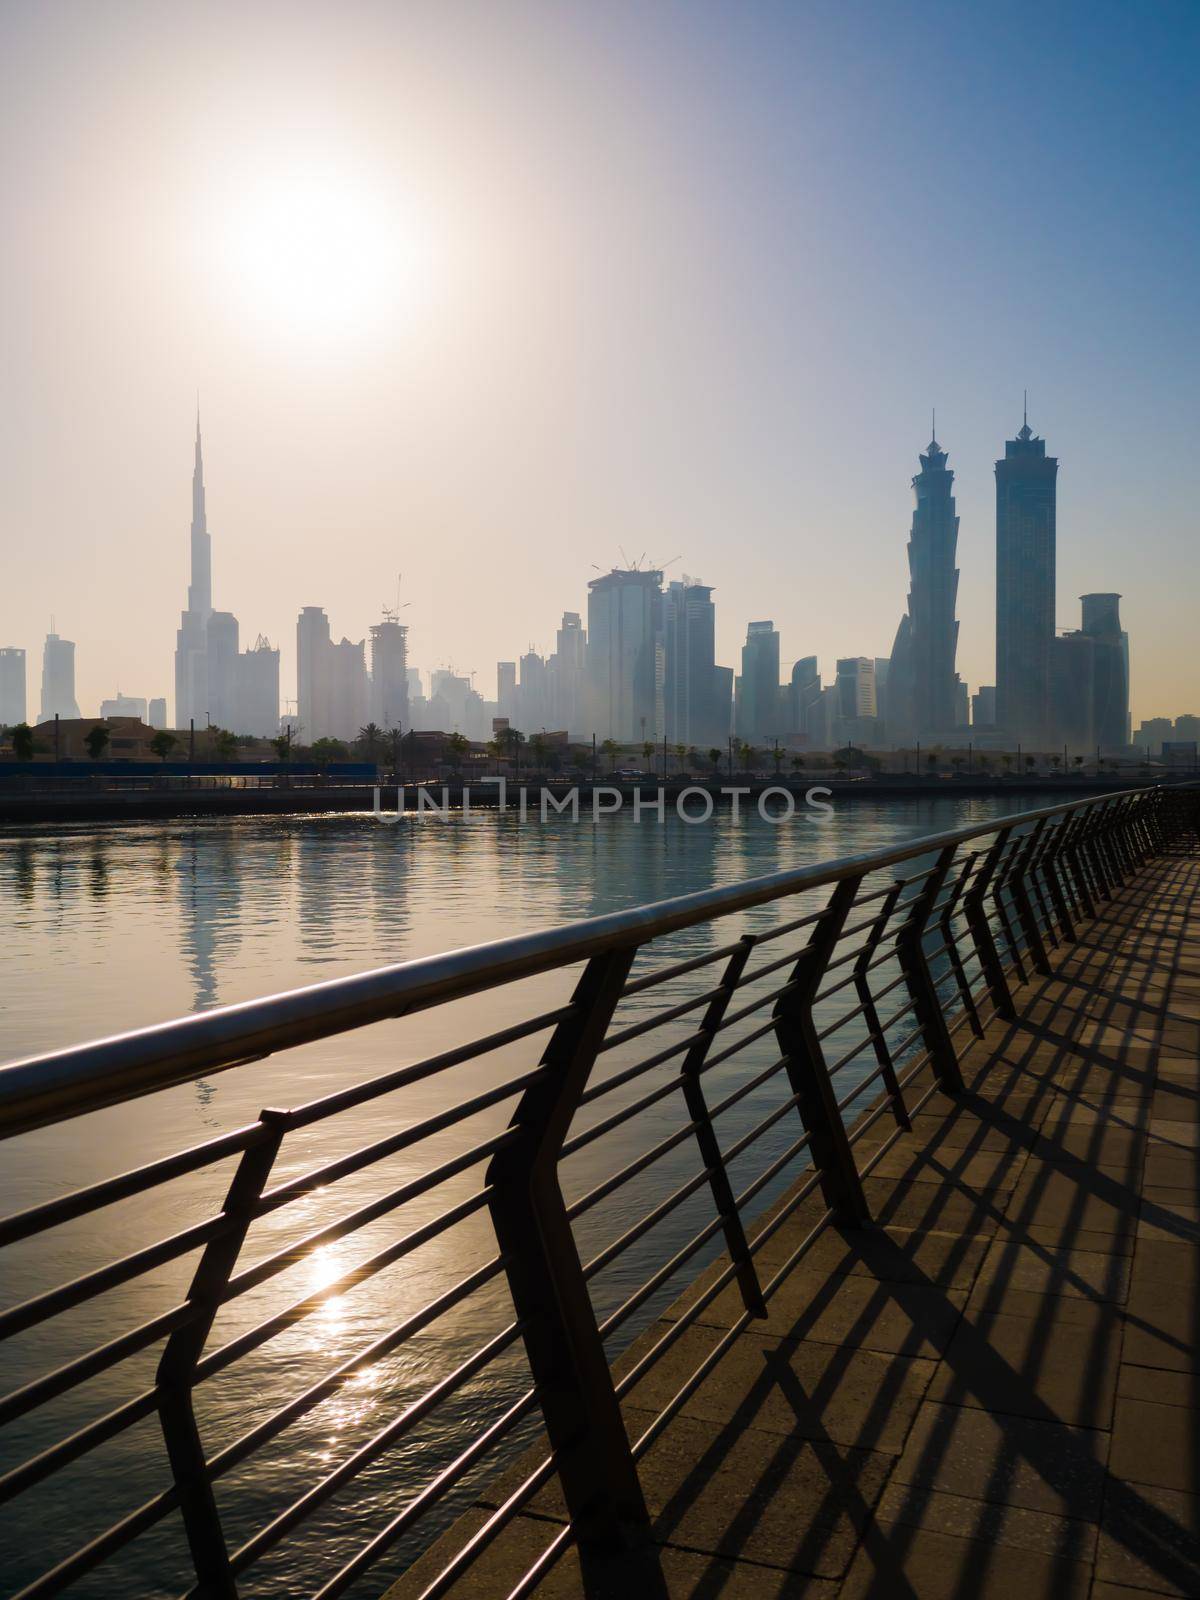 Panorama of the city of Dubai early in the morning at sunrise with a bridge over the city channel Dubai Greek. by DovidPro